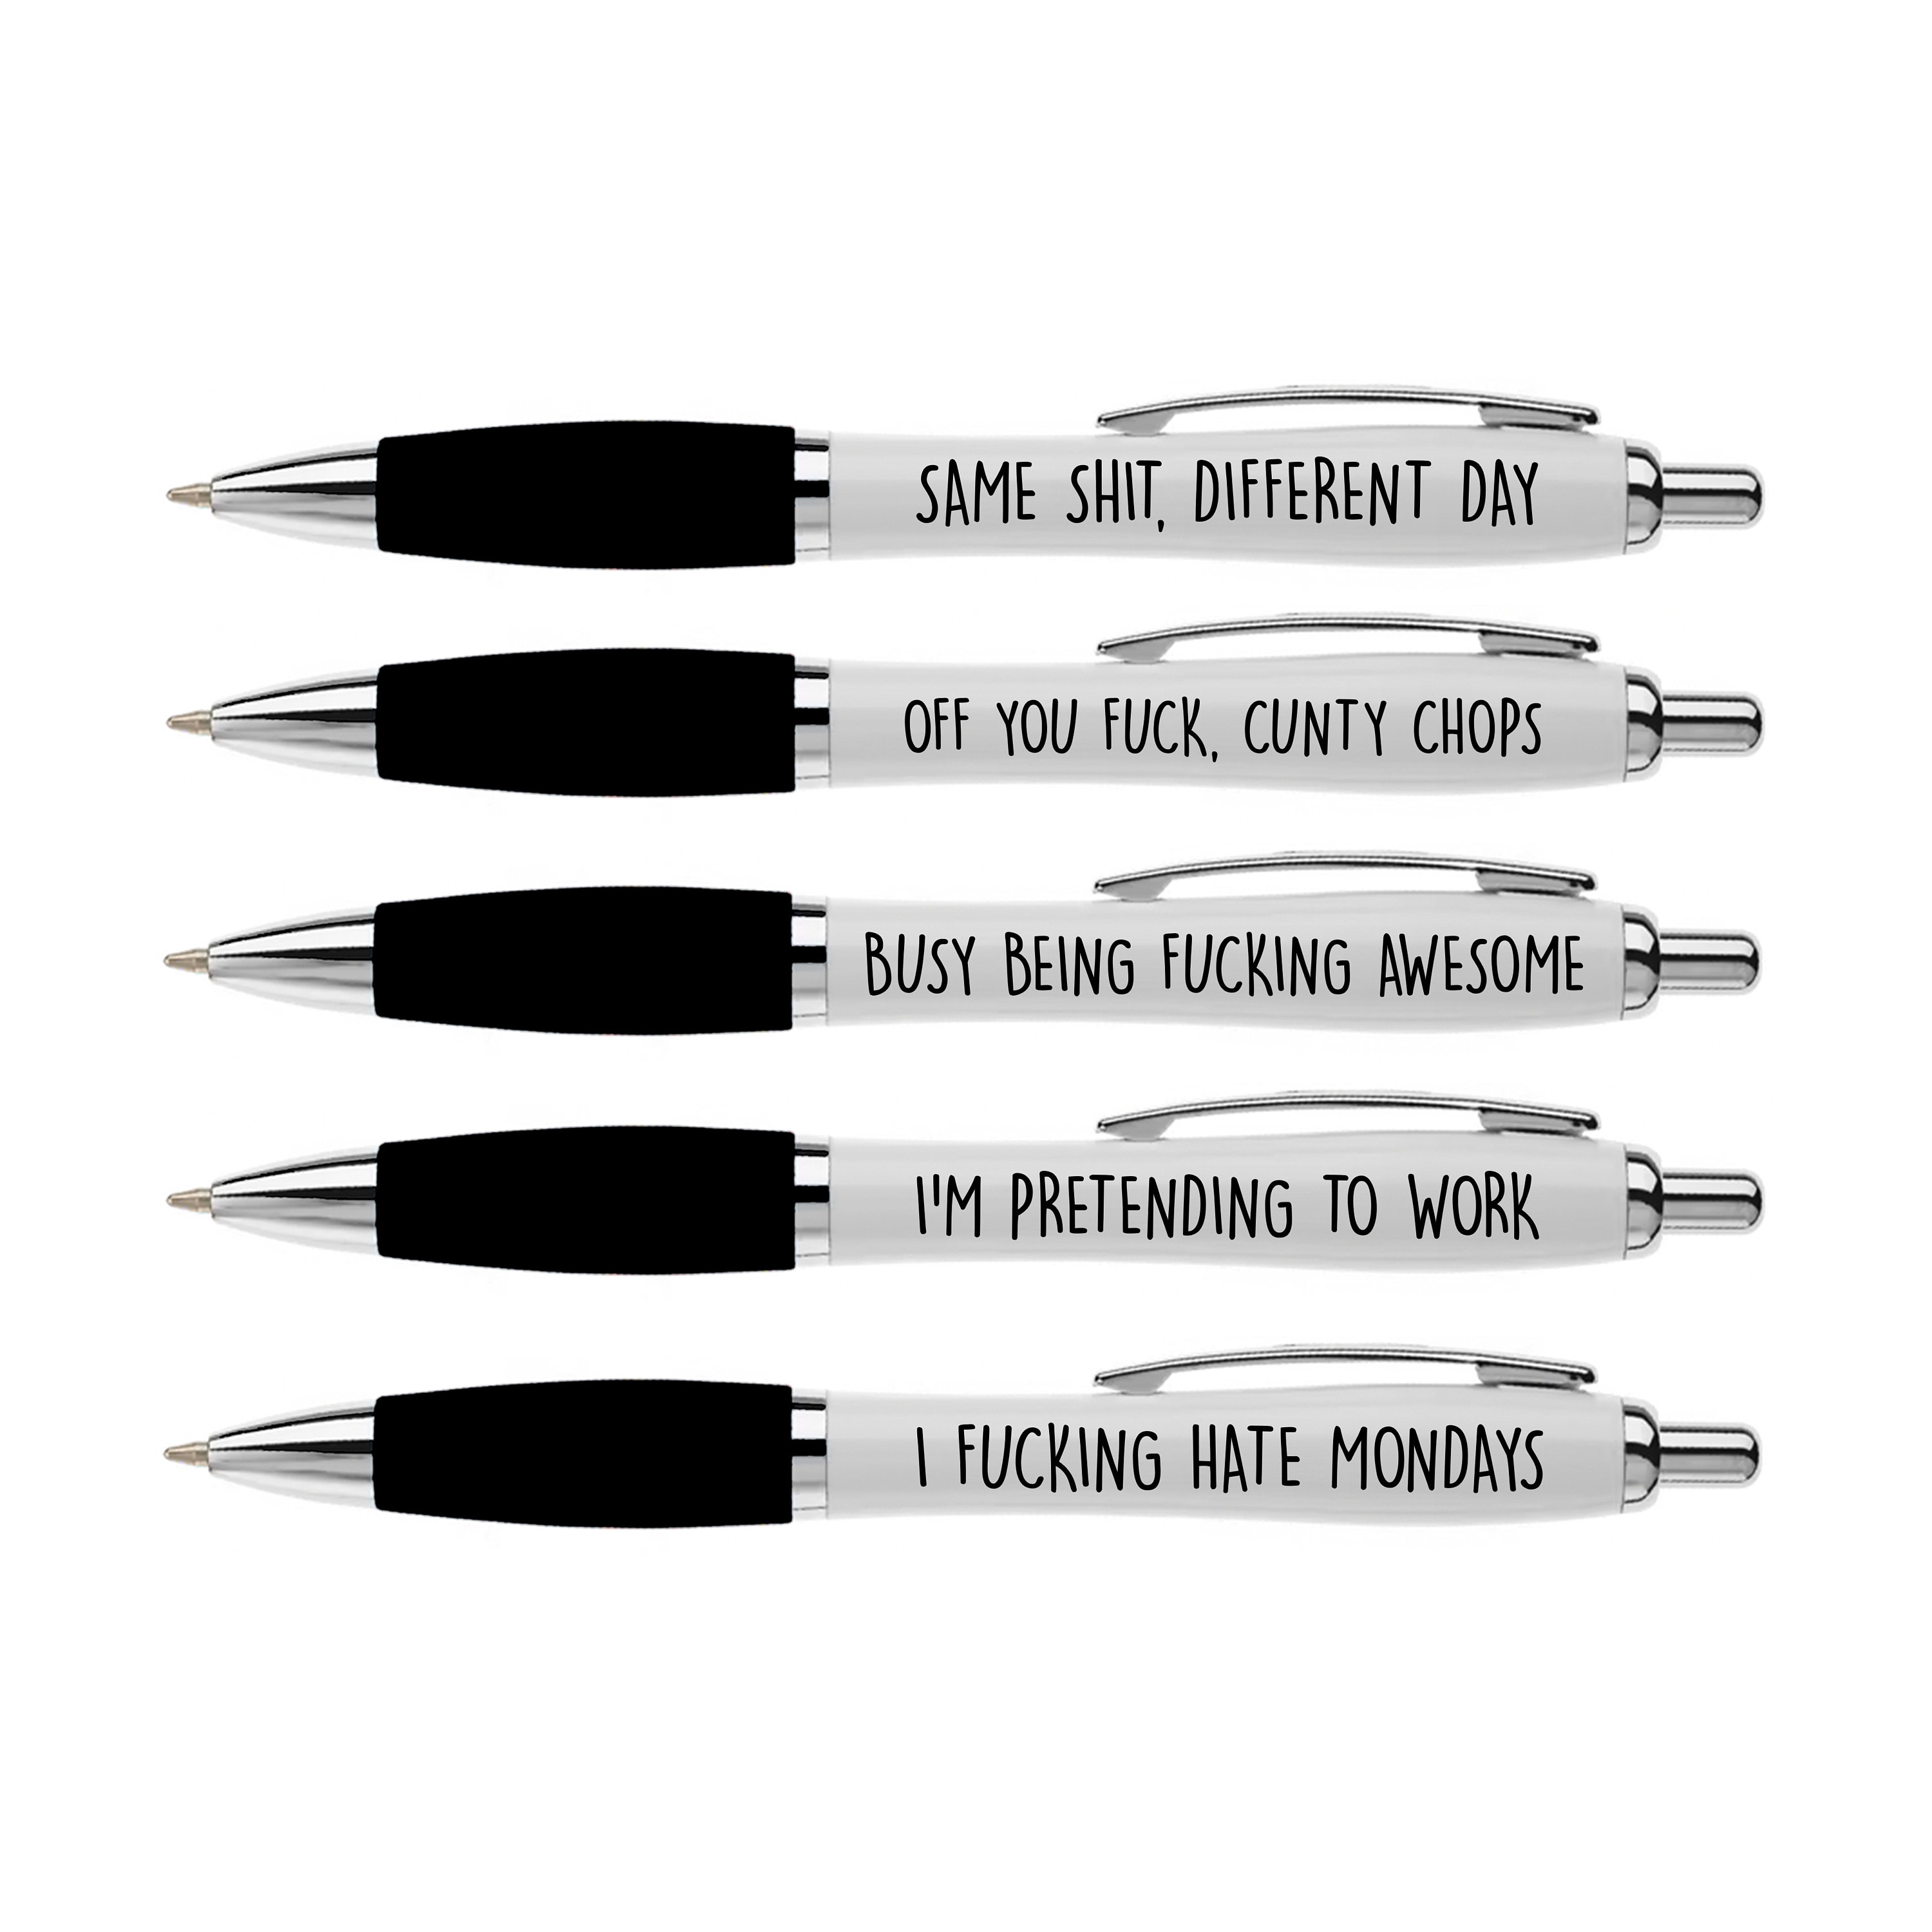 5x Rude Pens For Adults | Funny Boss Gifts Leaving Presents For Colleagues  | Silly Ballpoint Pen Novelty Funky Stationery Quirky Gift Office Desk